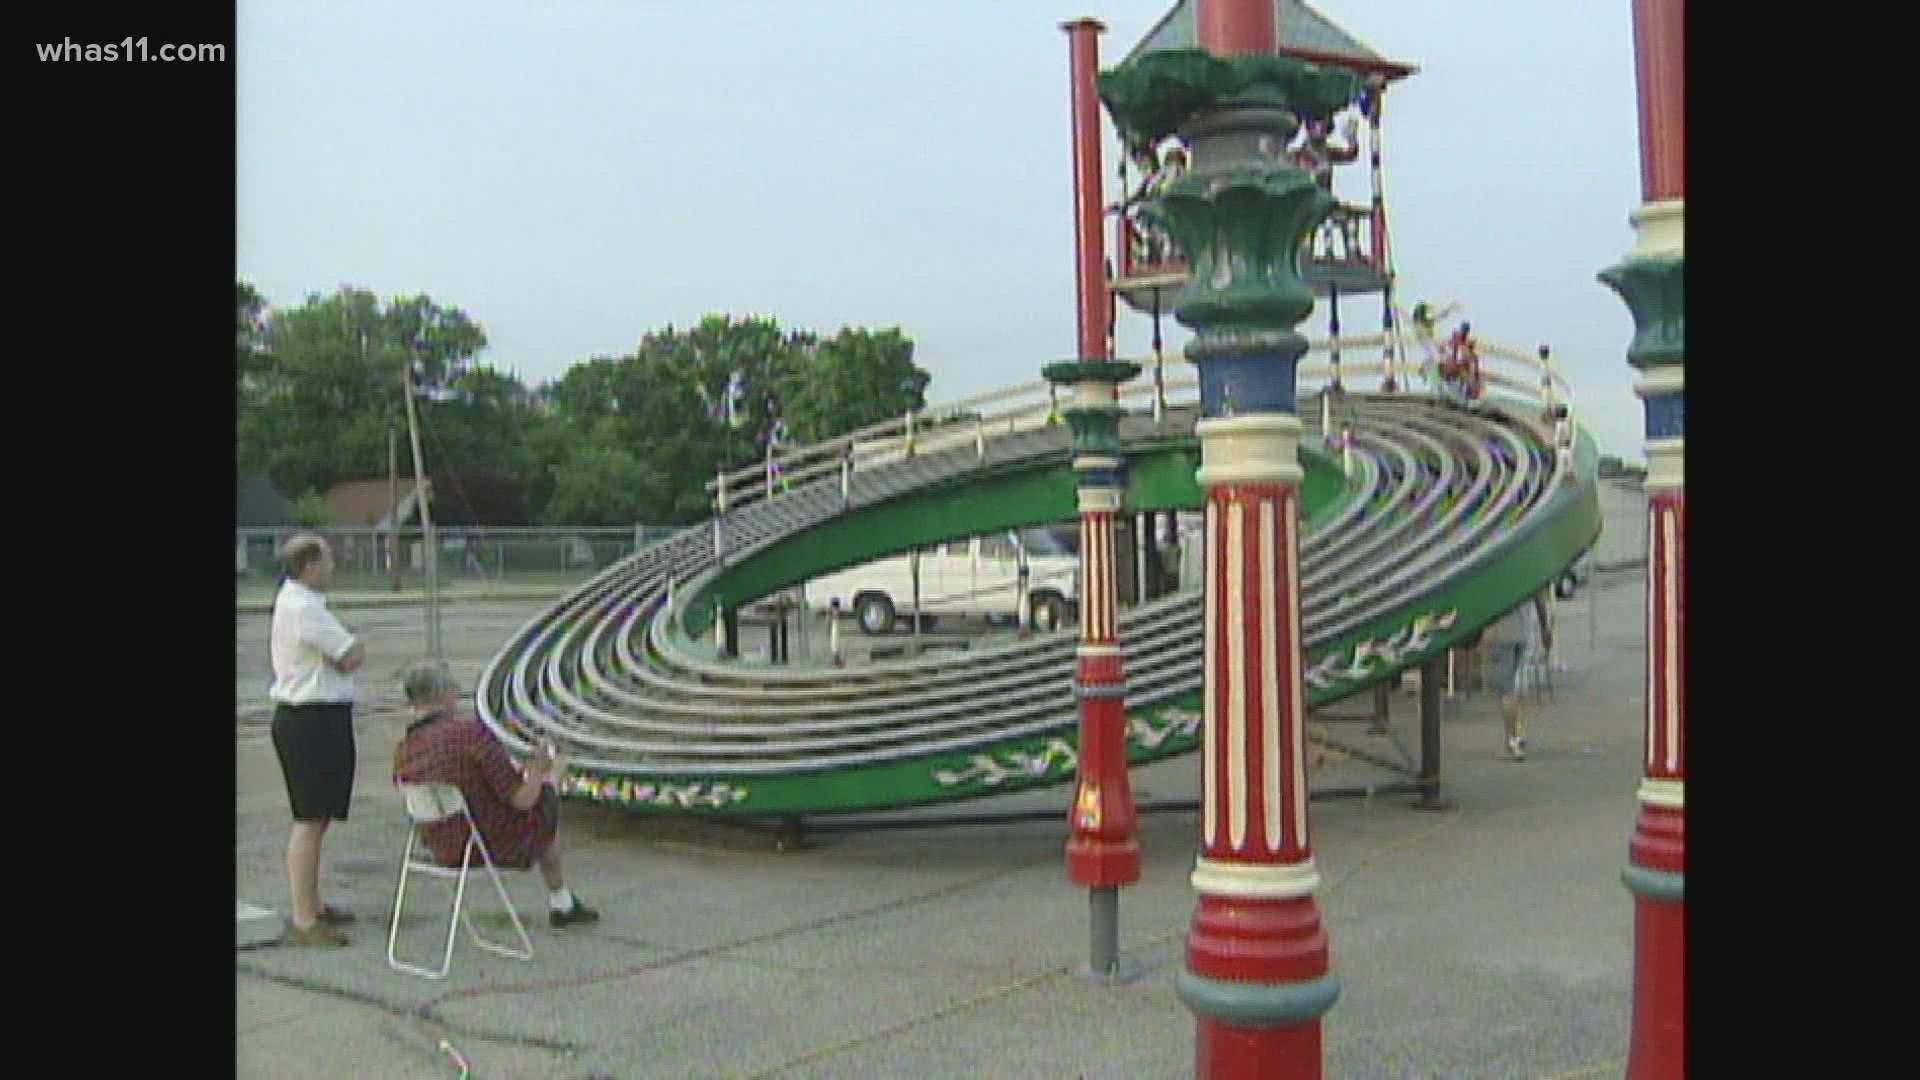 The whimsical staple was a favorite destination for those visiting downtown Louisville. After years of problems and maintenance, it was put away for good.